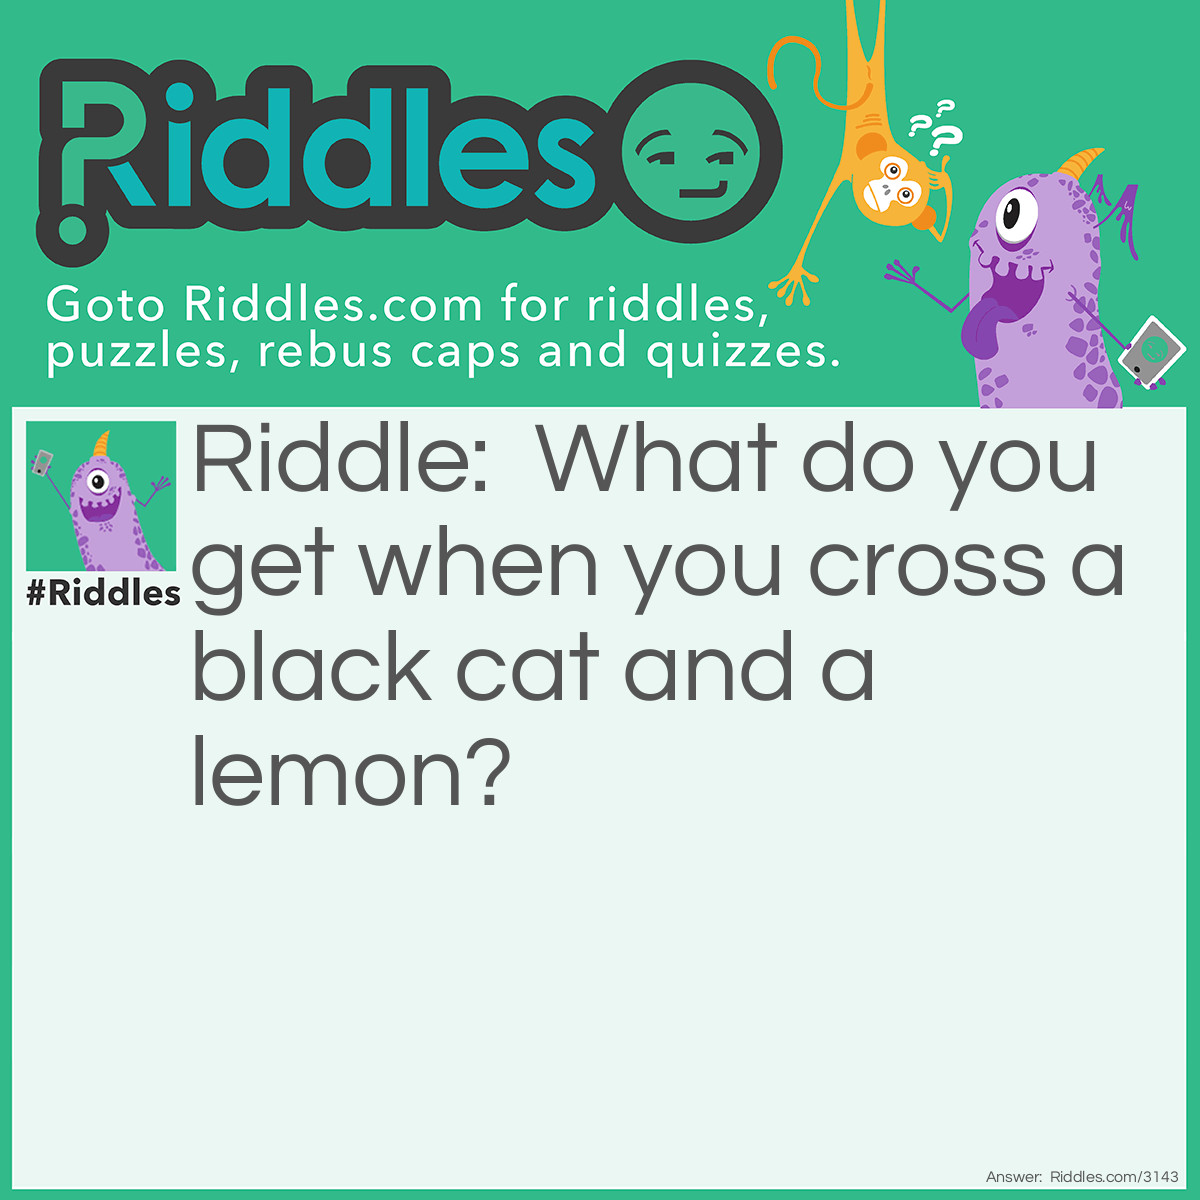 Riddle: What do you get when you cross a black cat and a lemon? Answer: A Sour Puss.